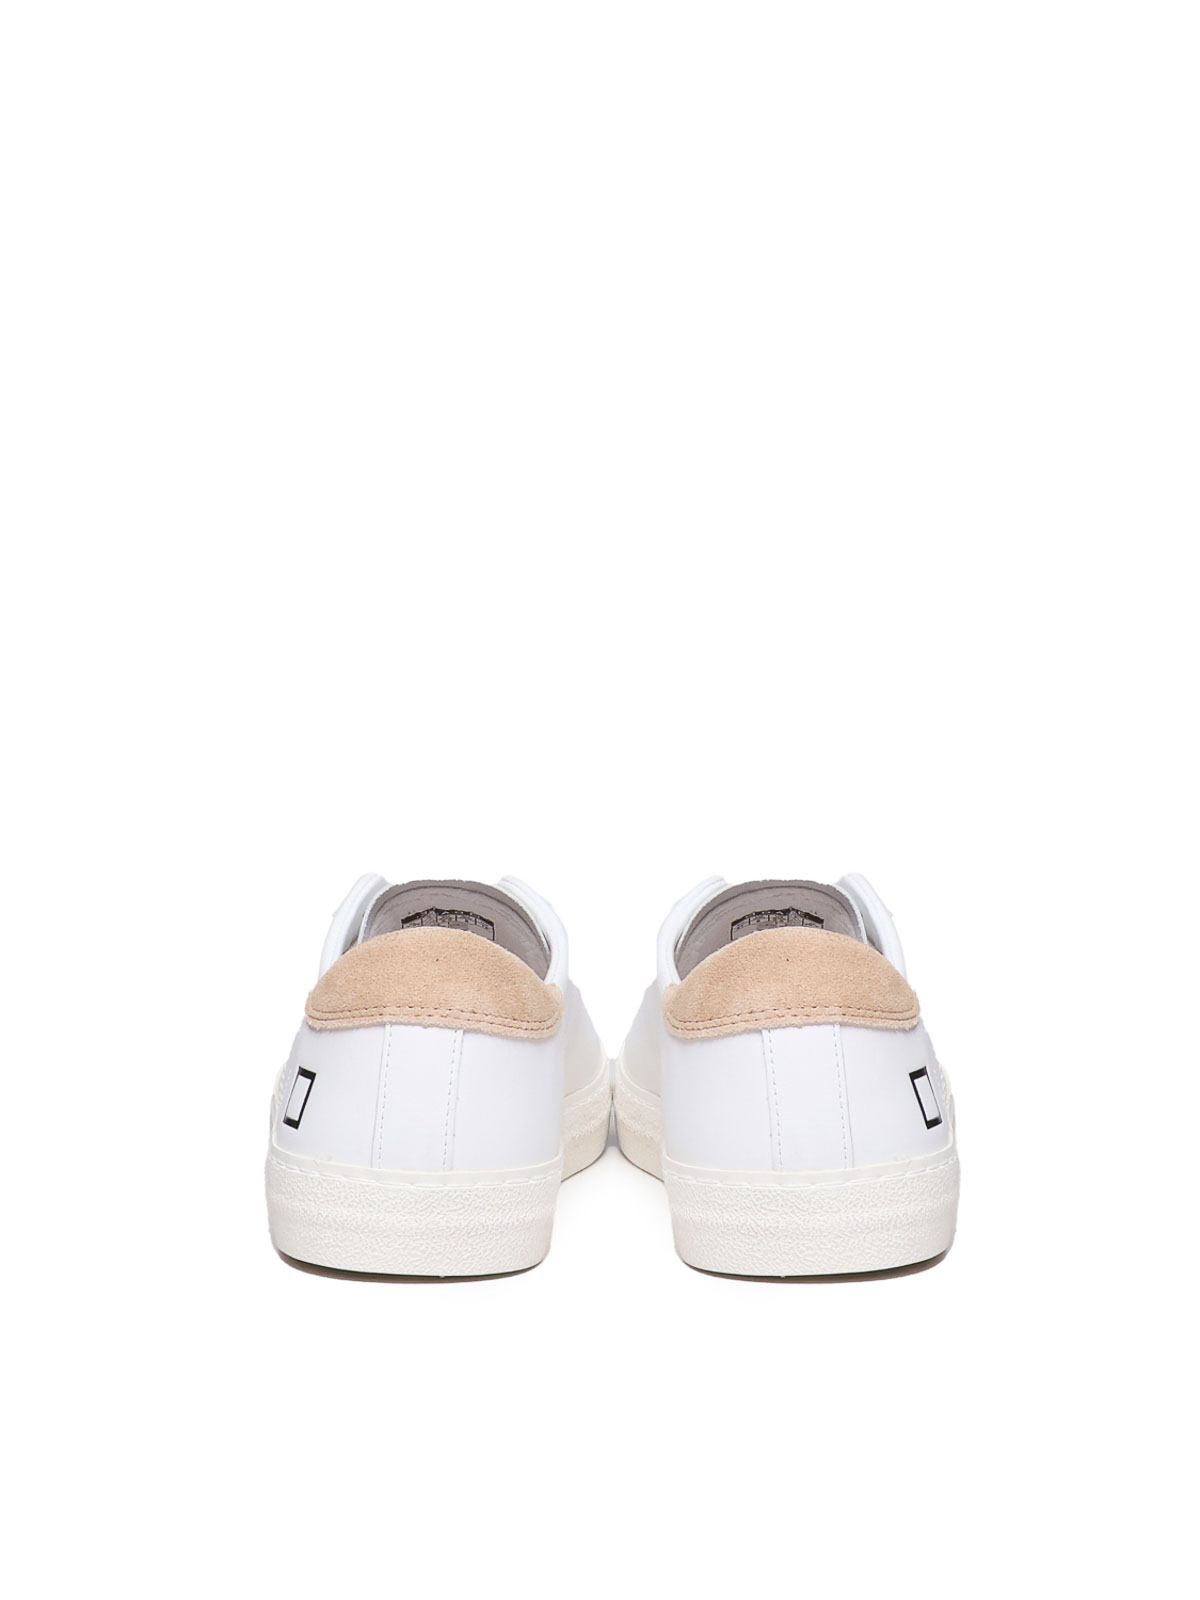 Shop Date Vintage Hill Low Sneakers In Taupe